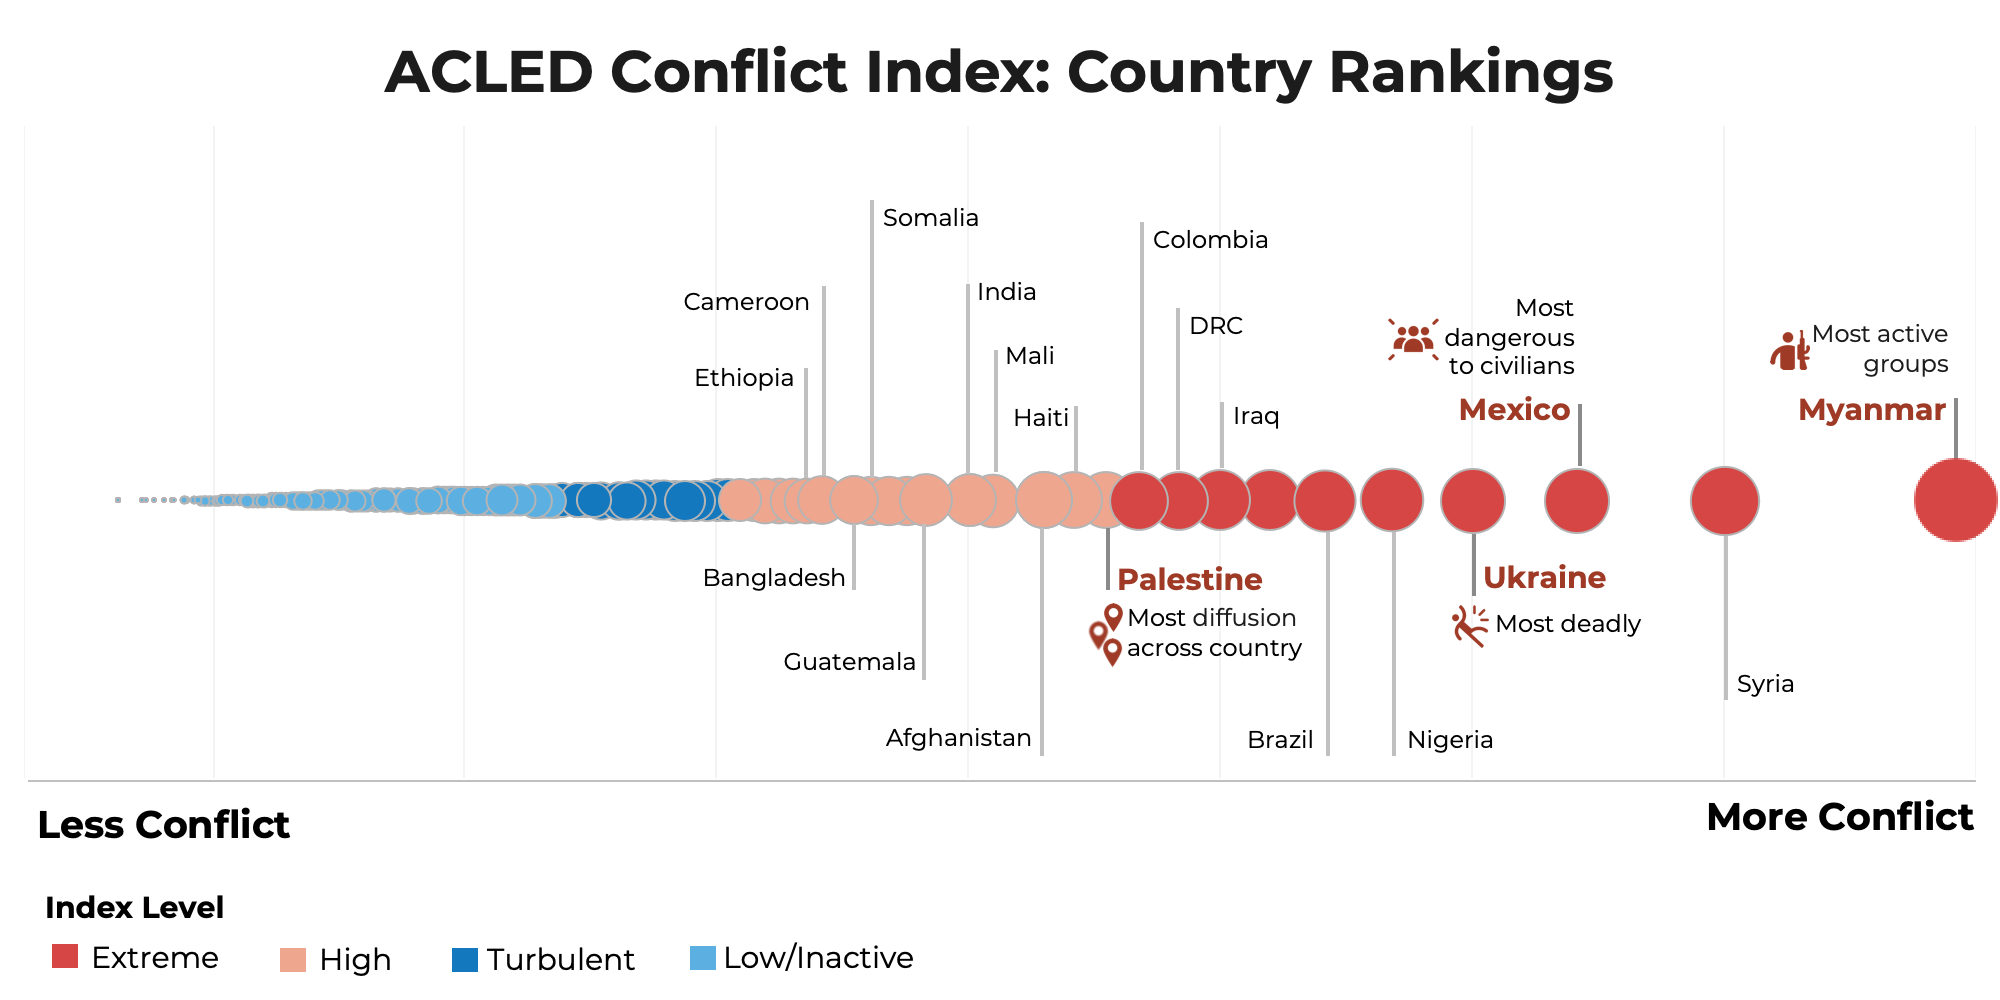 ACLED Conflict Index